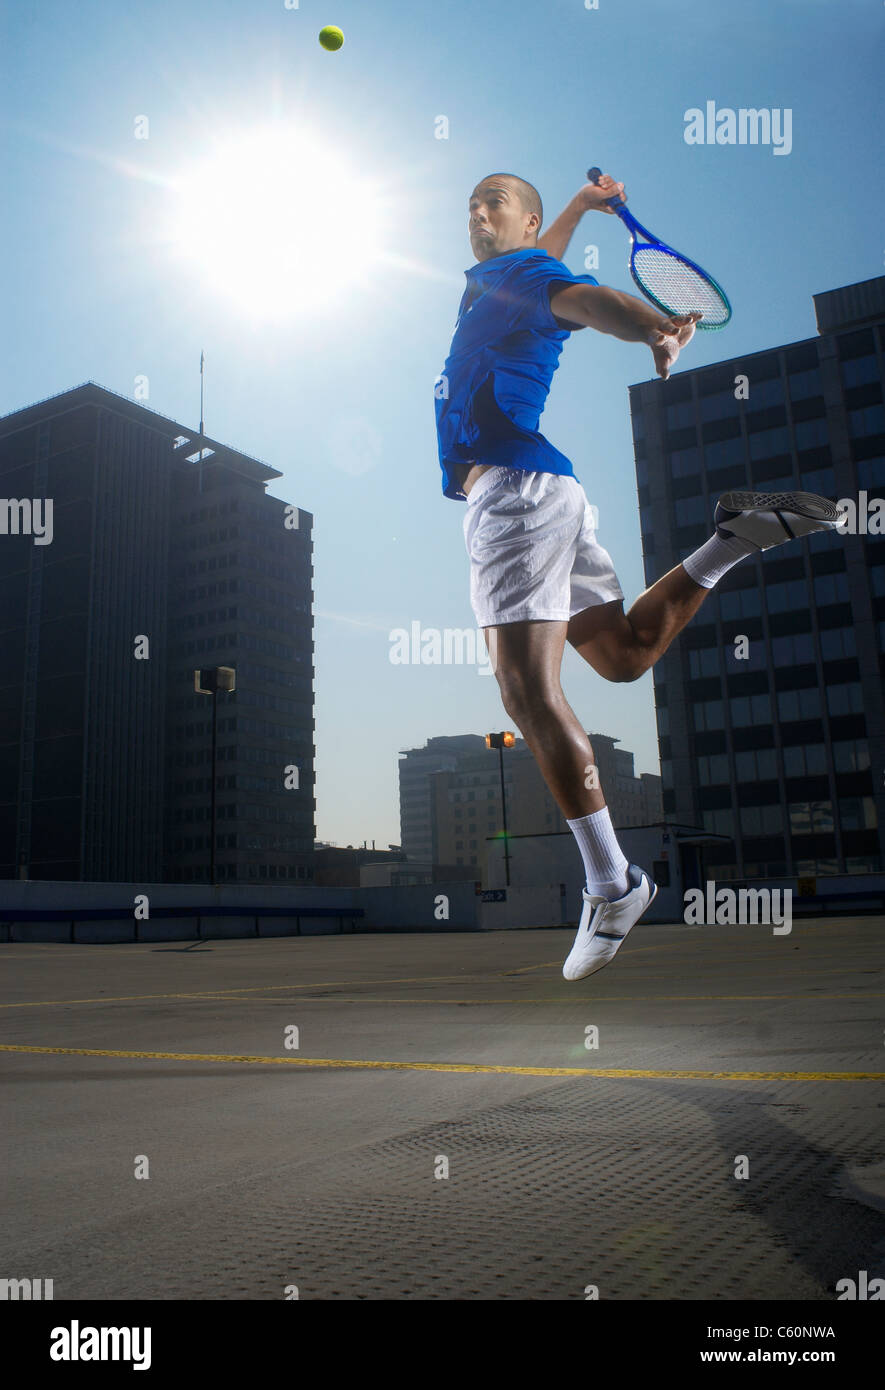 Tennis player jumping on rooftop court Stock Photo